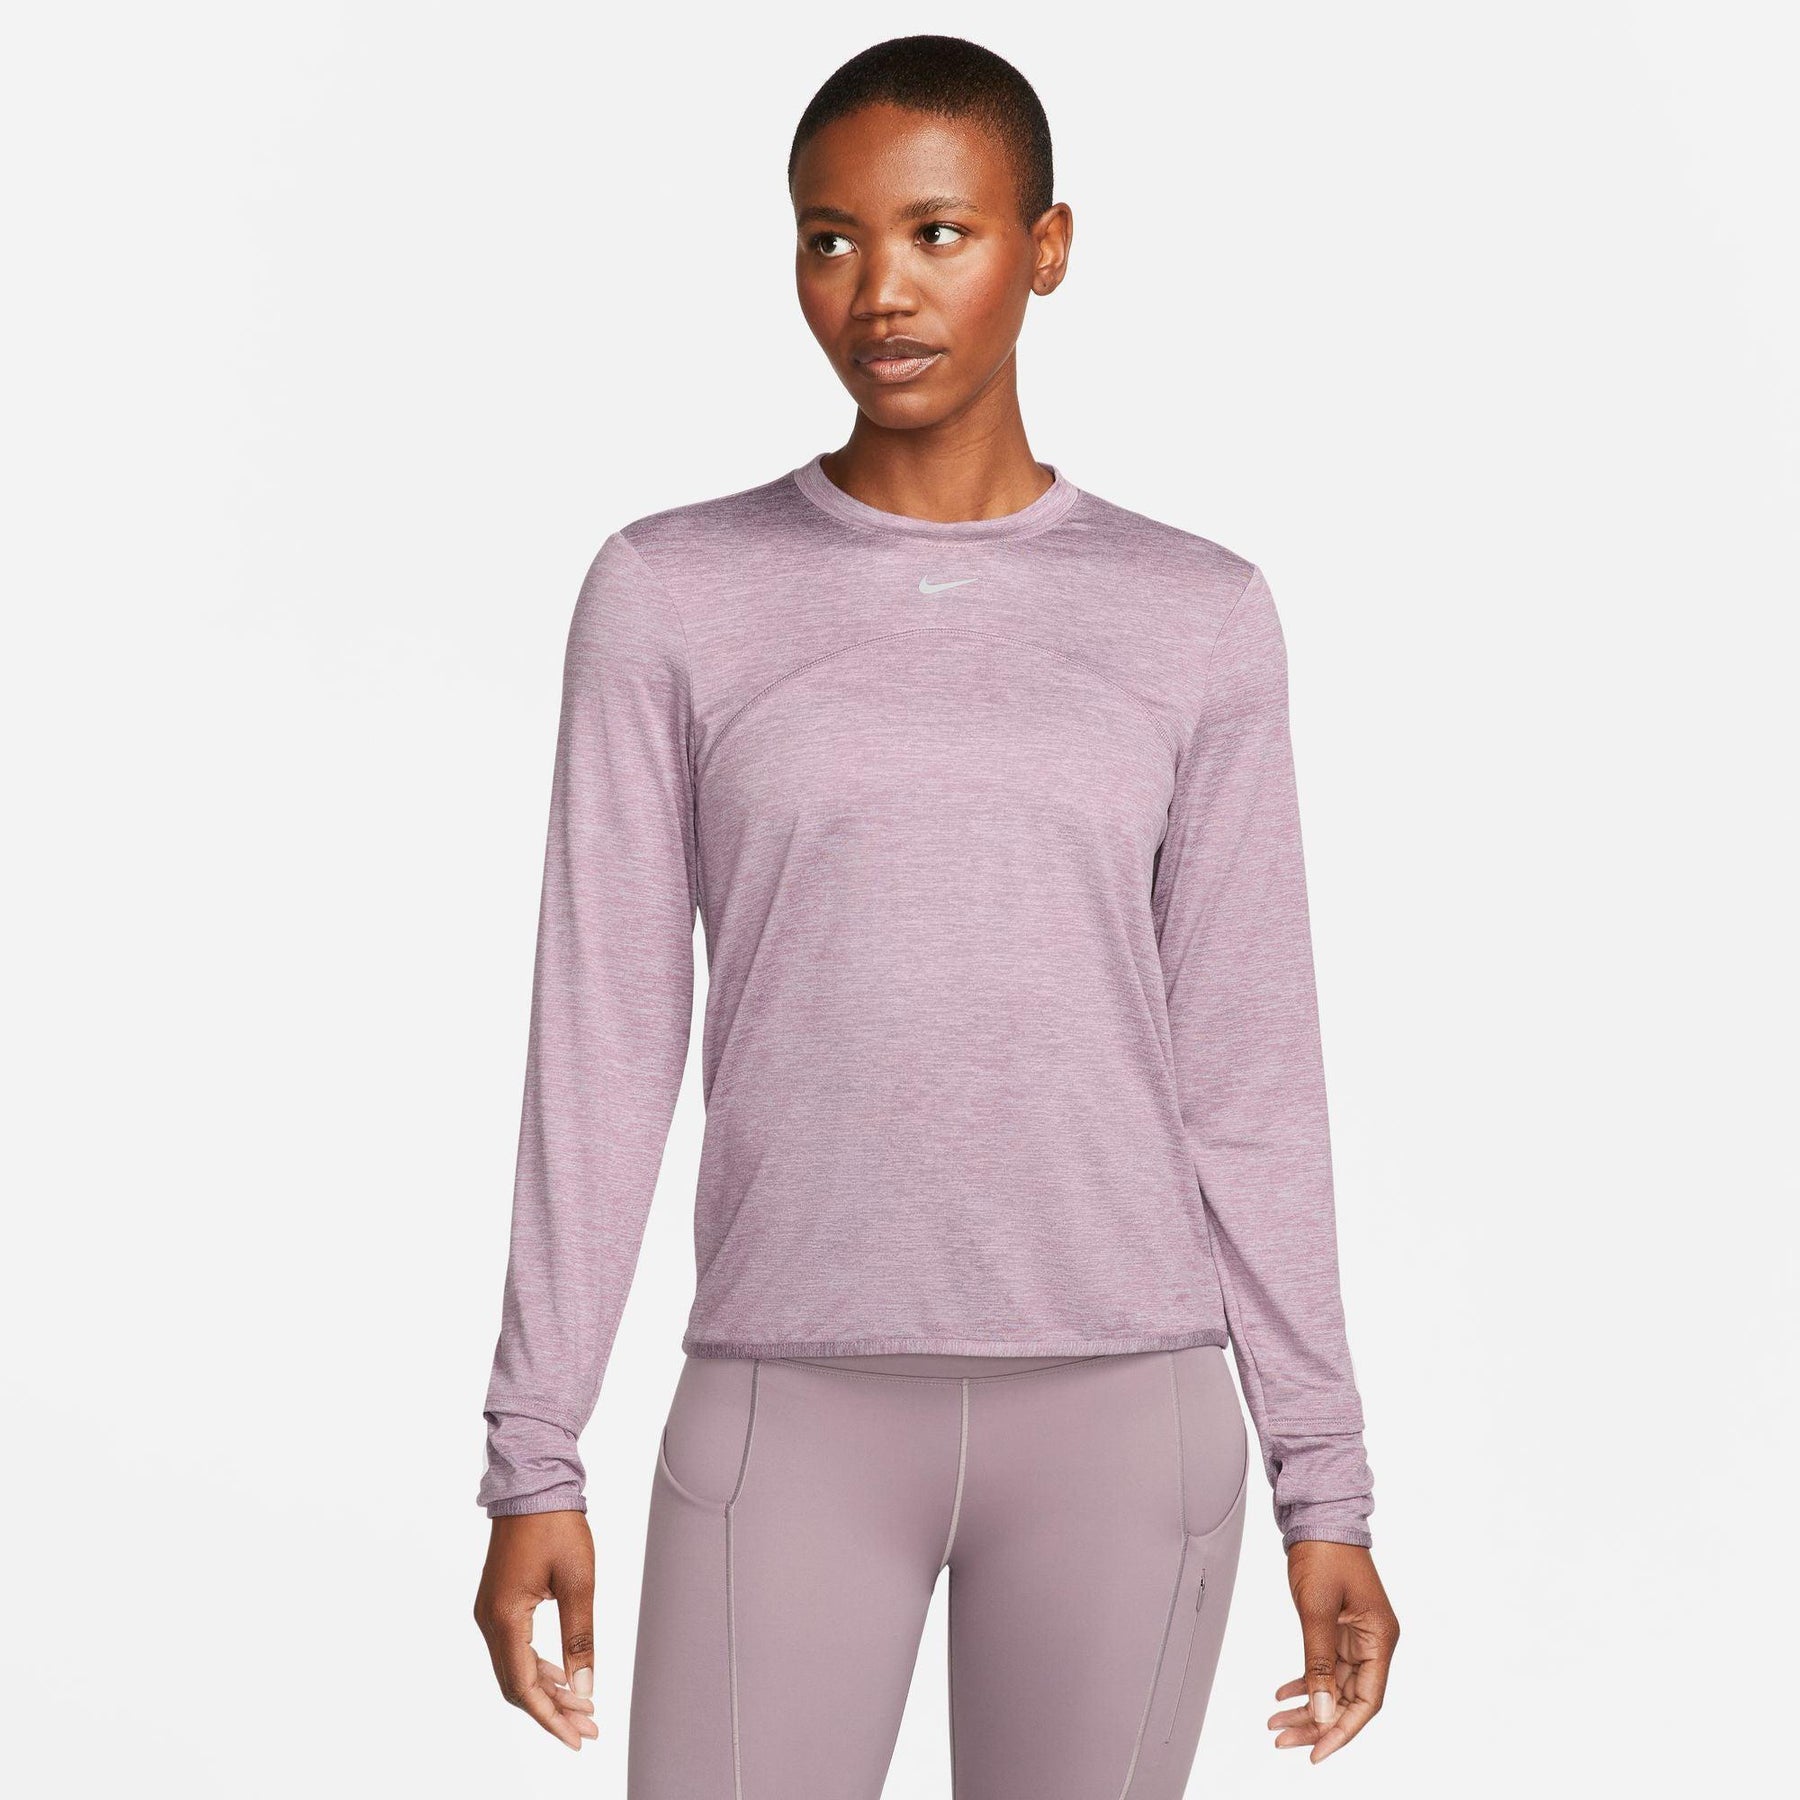 Nike-Women's Nike Dri-FIT Swift Element UV-Violet Dust/Pewter/HTR/Reflective Silv-Pacers Running